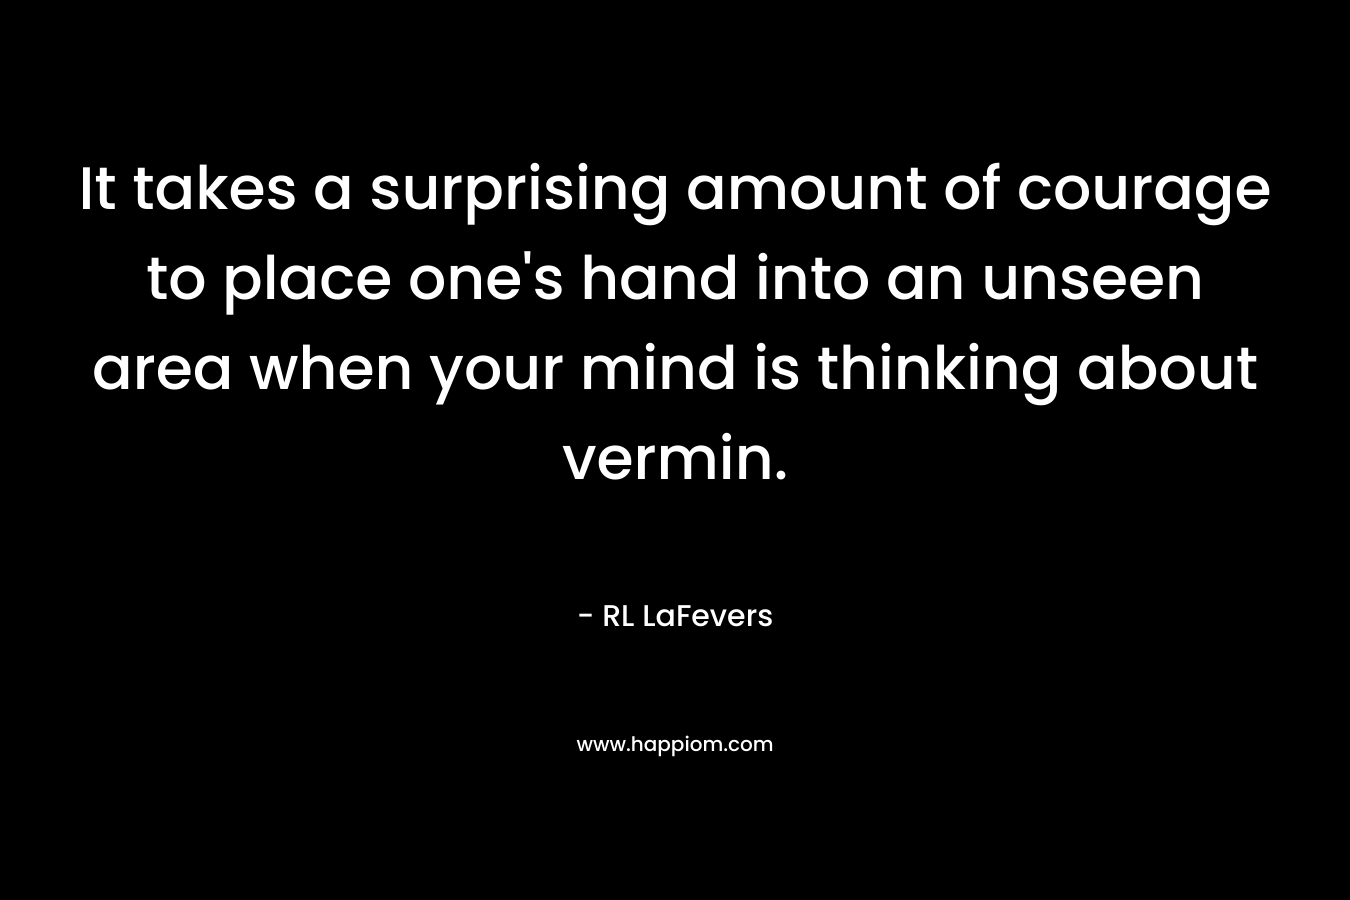 It takes a surprising amount of courage to place one's hand into an unseen area when your mind is thinking about vermin.